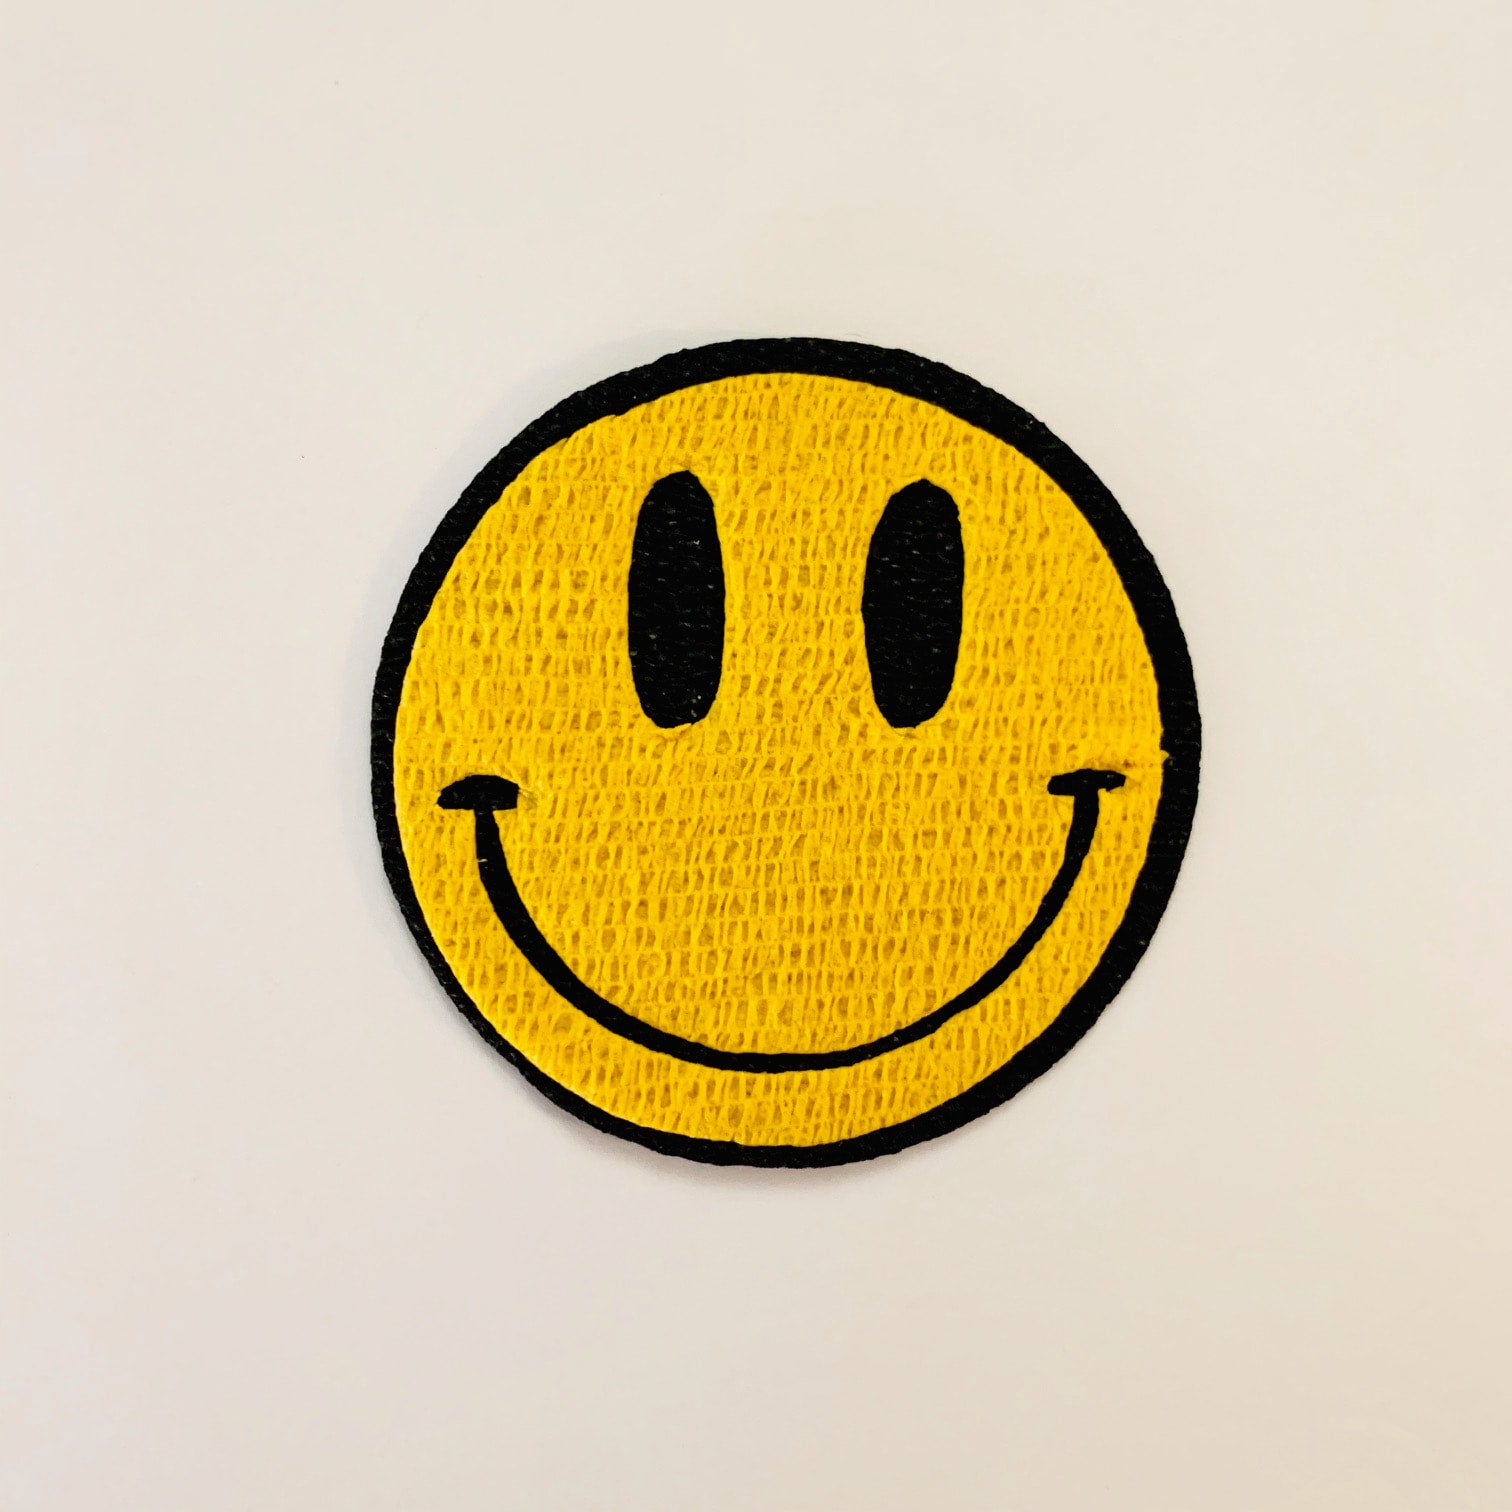 Bandage Embroidered Iron-On Patch